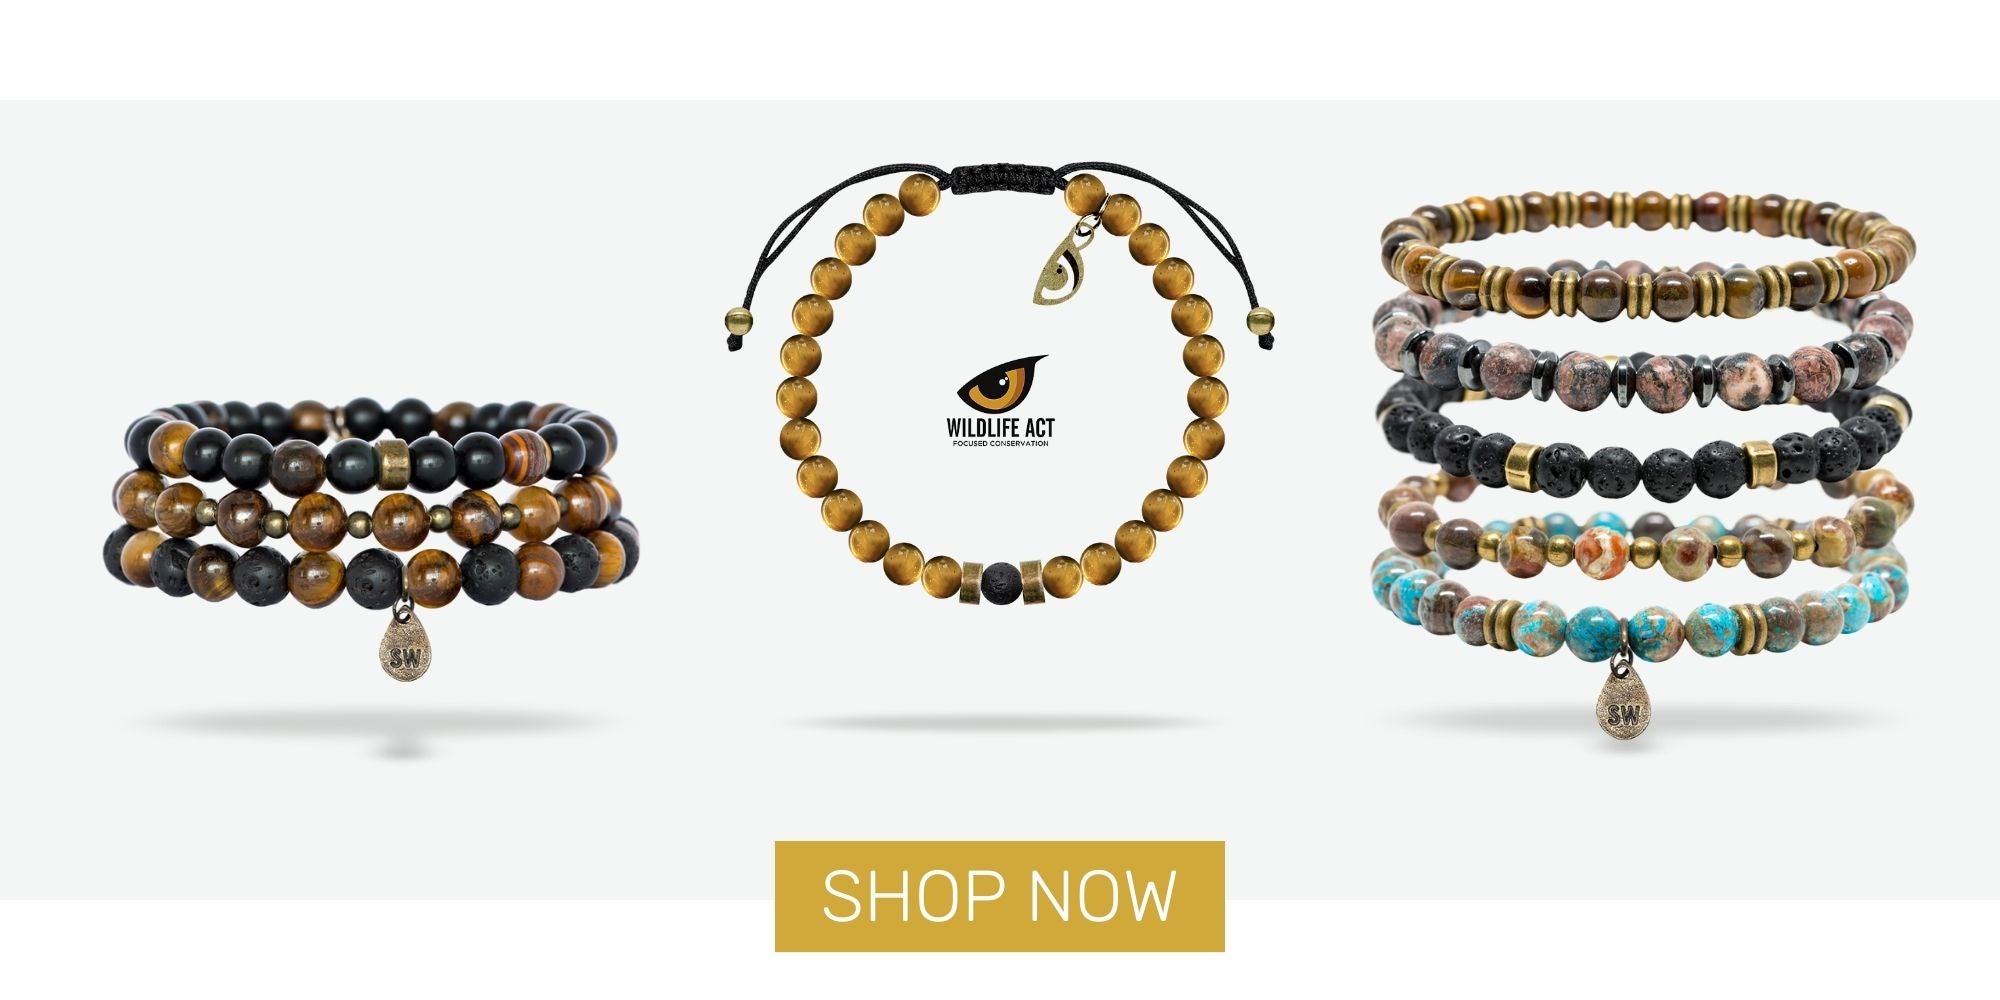 Beaded bracelets supporting conservation by Wild In Africa